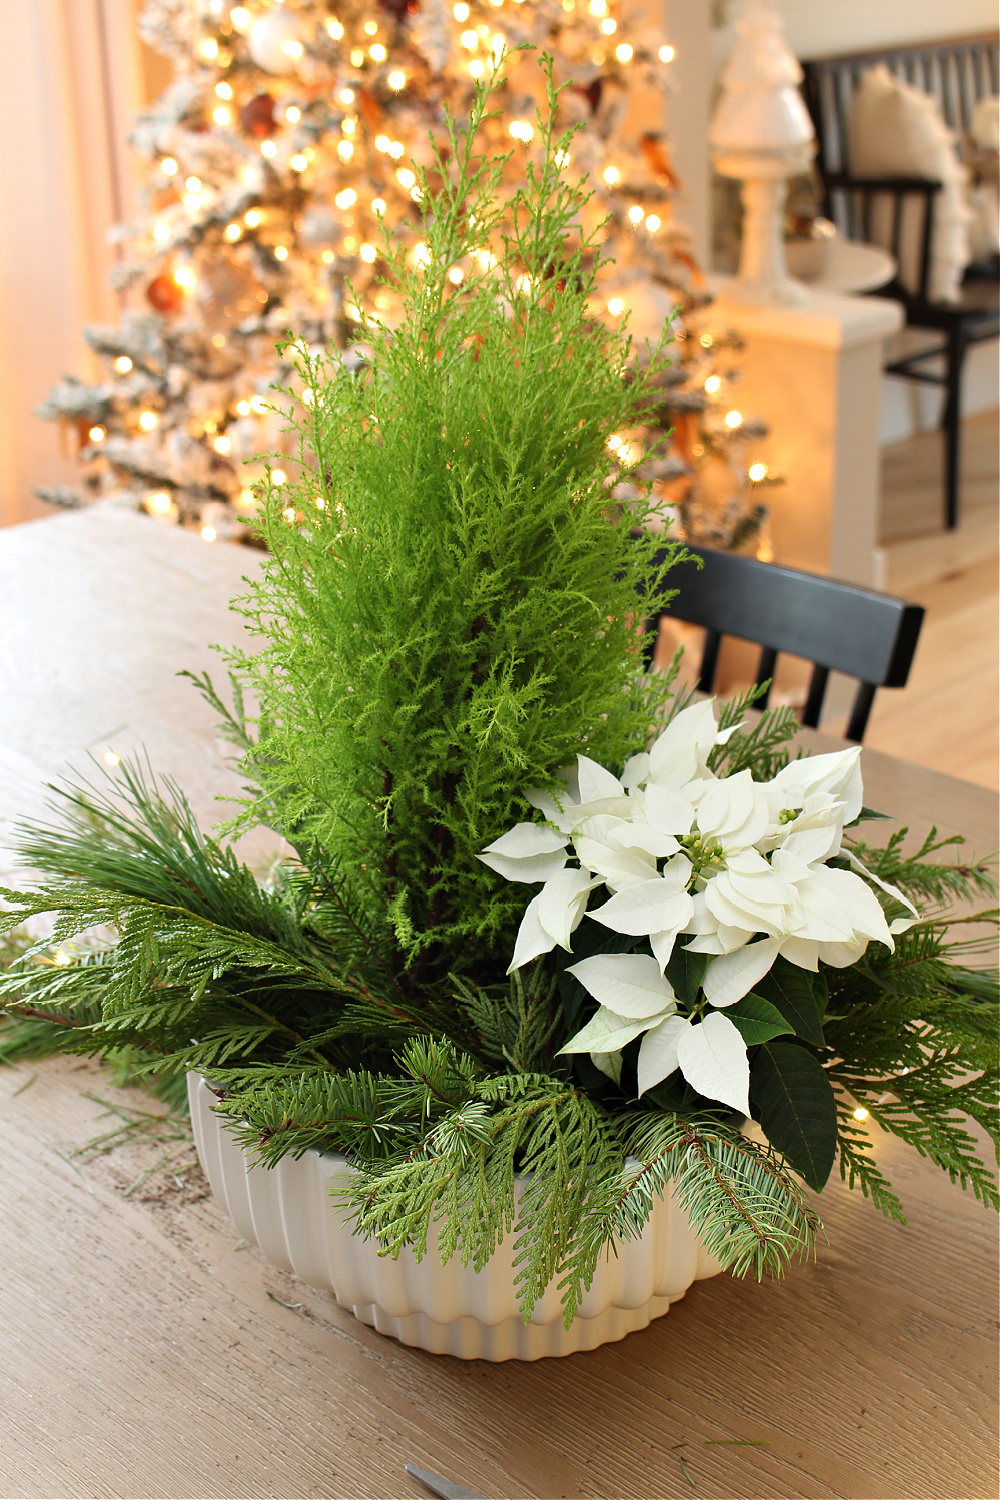 Step by step to create a fresh greenery Christmas centerpiece with a lemon cypress and poinsettia.